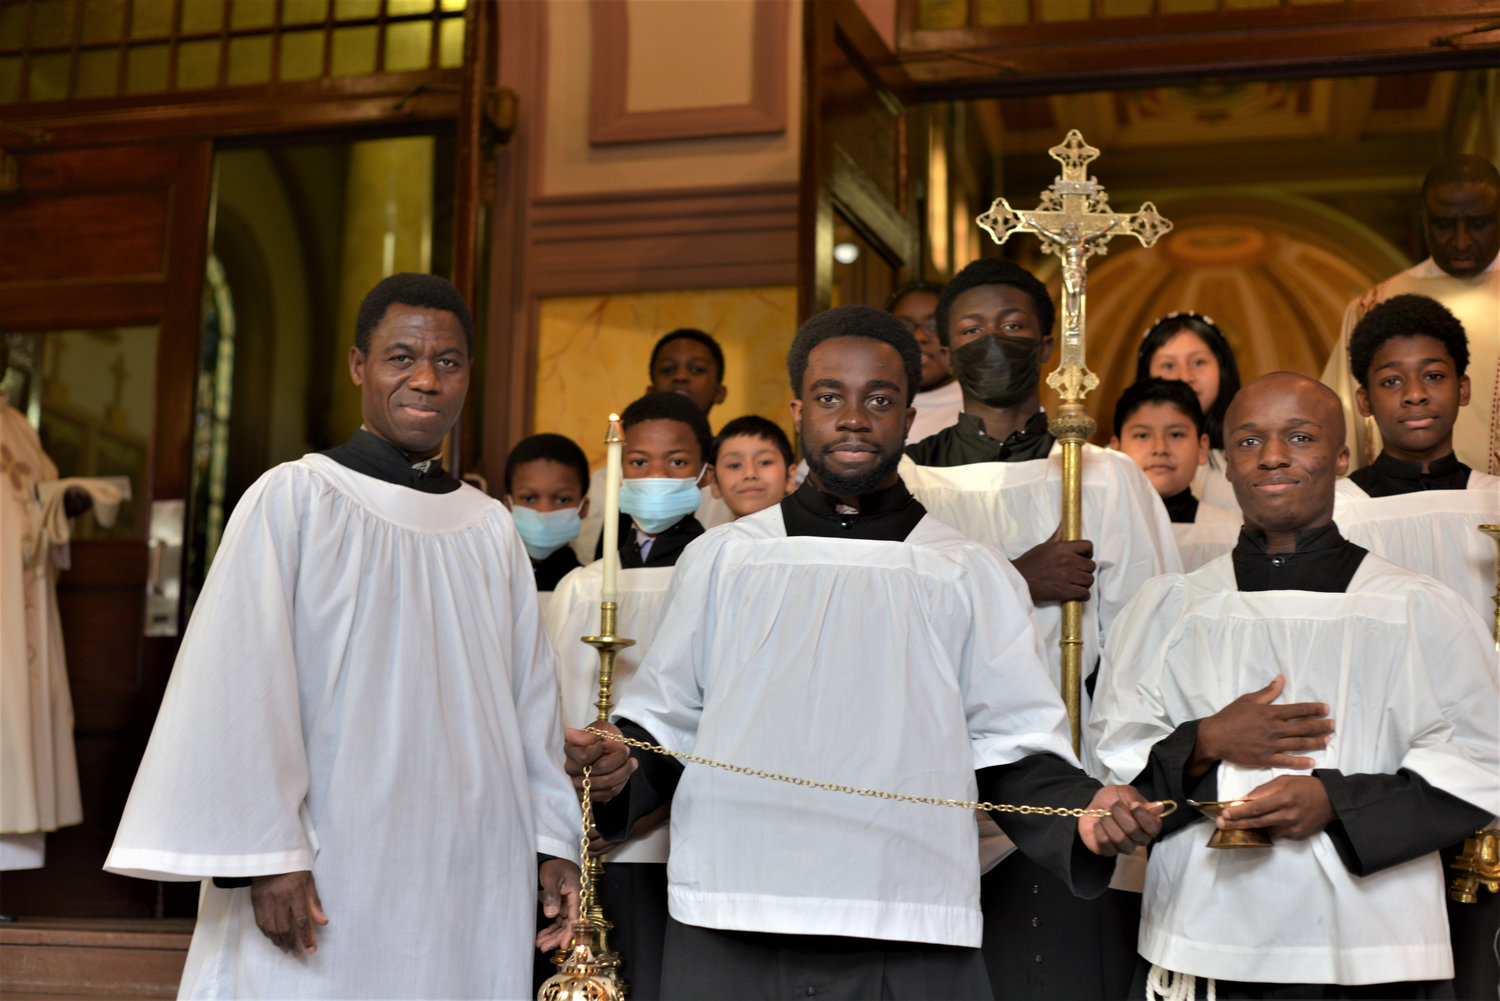 A group photo features a number of altar servers.